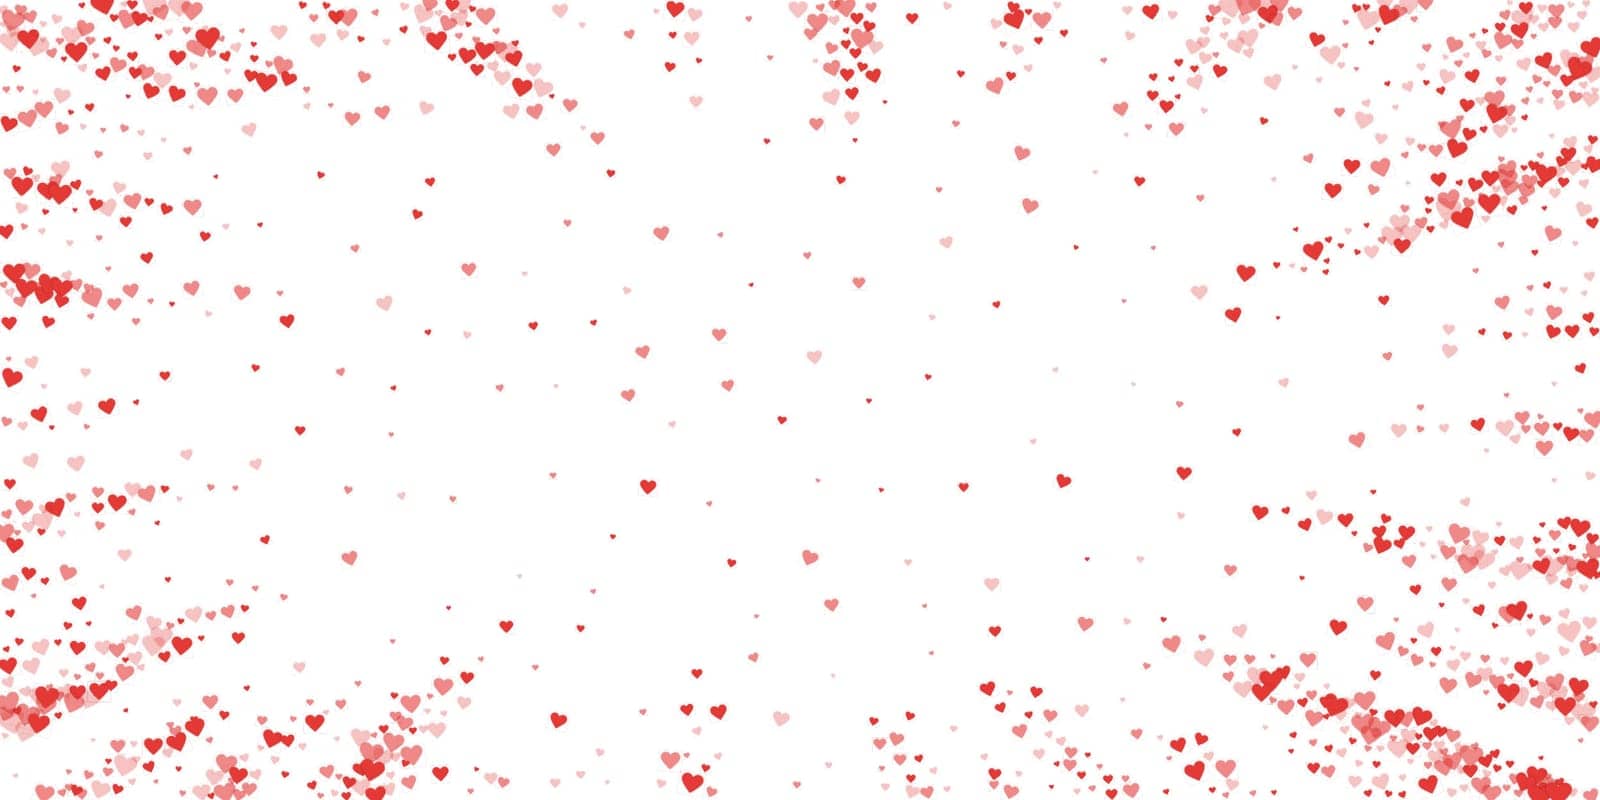 Red hearts scattered on white background. by beginagain